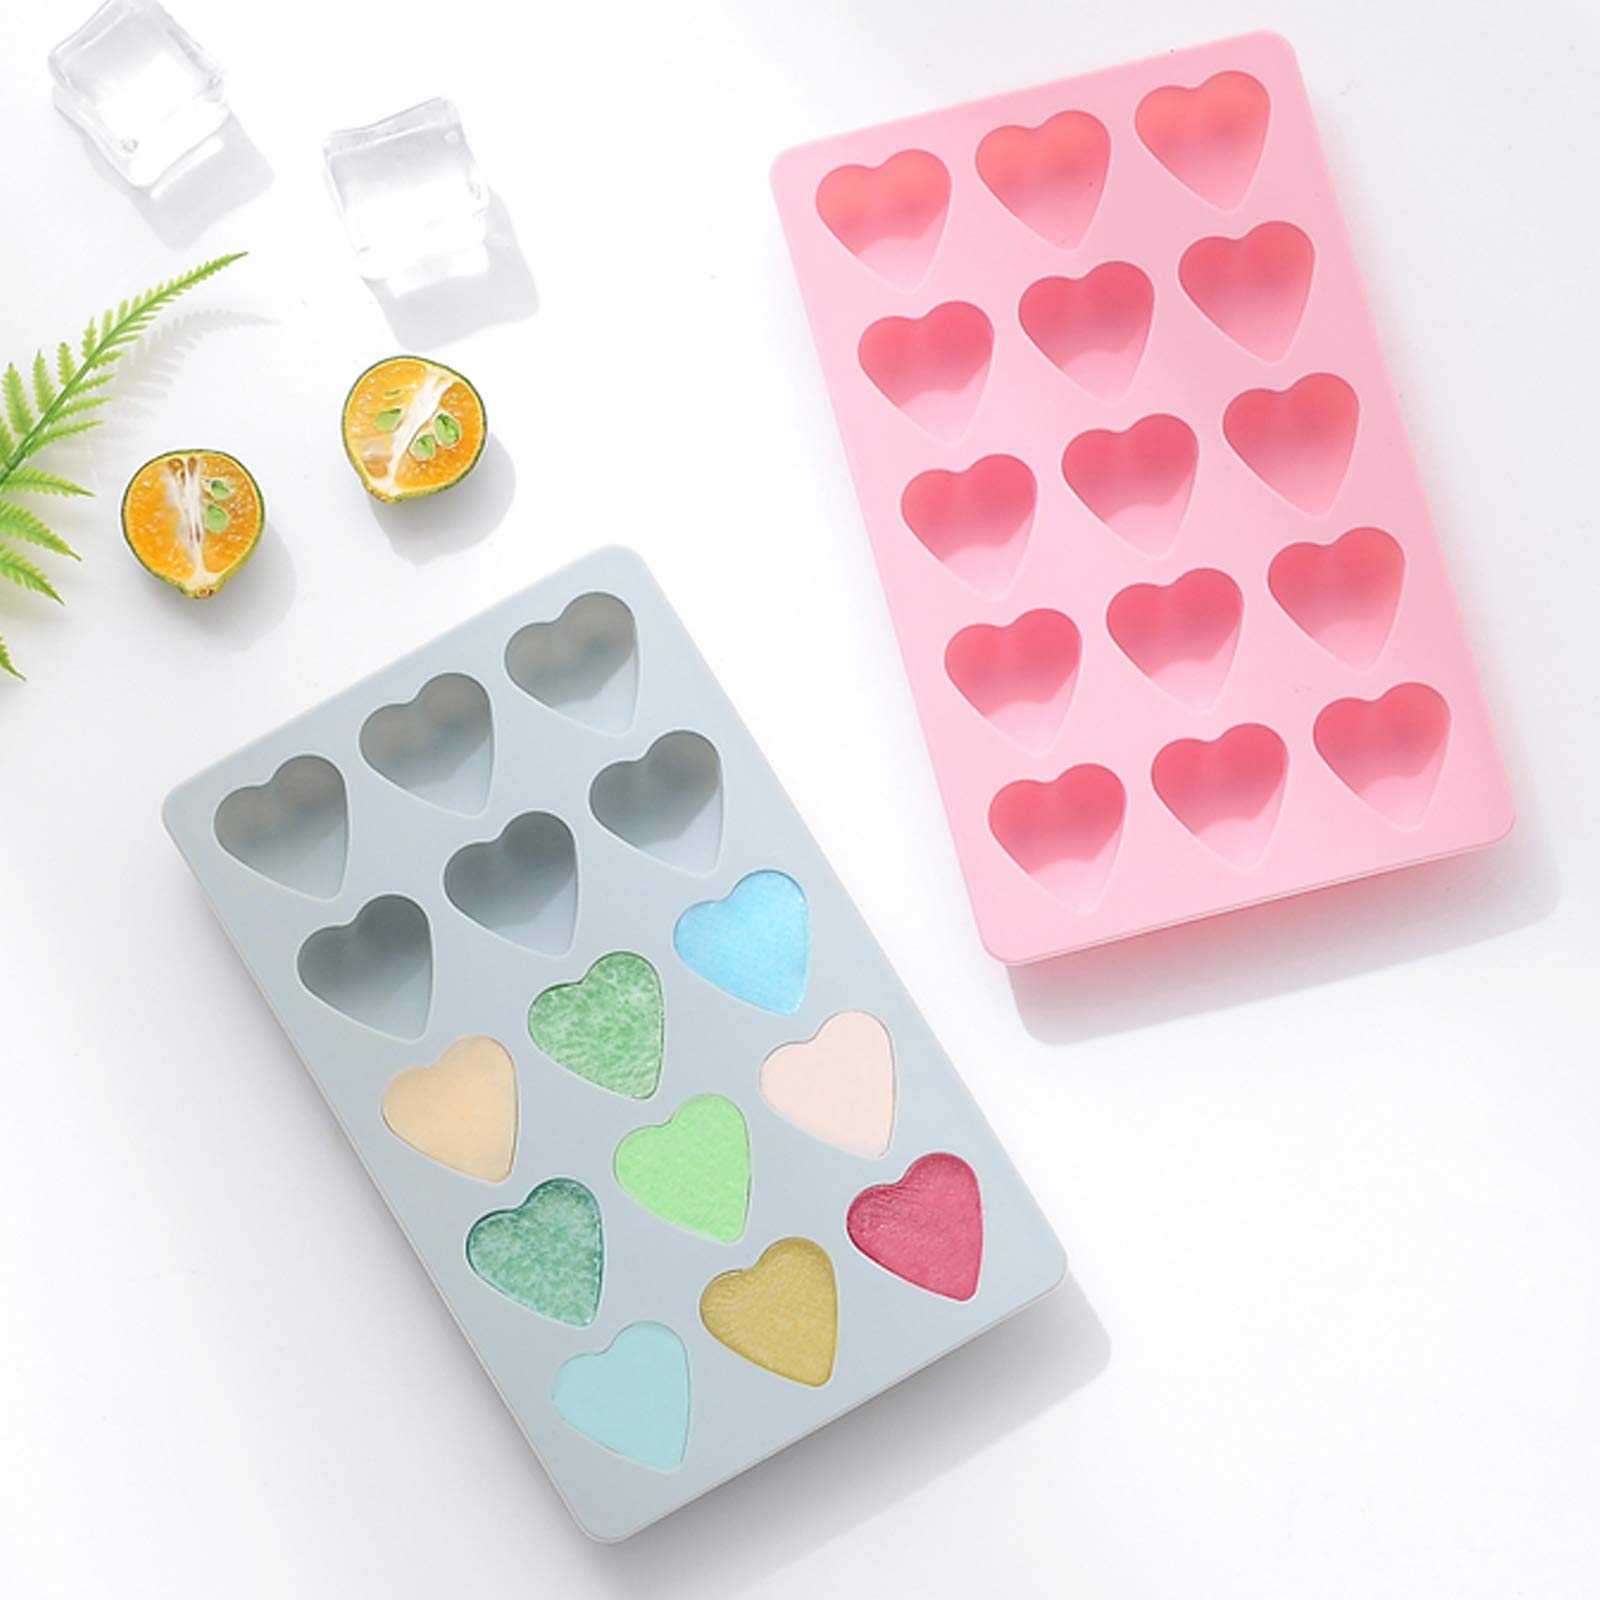 Rekidool 3 Pieces Candy and Chocolate Silicone Molds Set Non-stick Including Heart, Round, Square Baking Mold for Hard Candy, Gummy, Hot Caramel, Ice, Cake, Jello, Ganache (Pink)